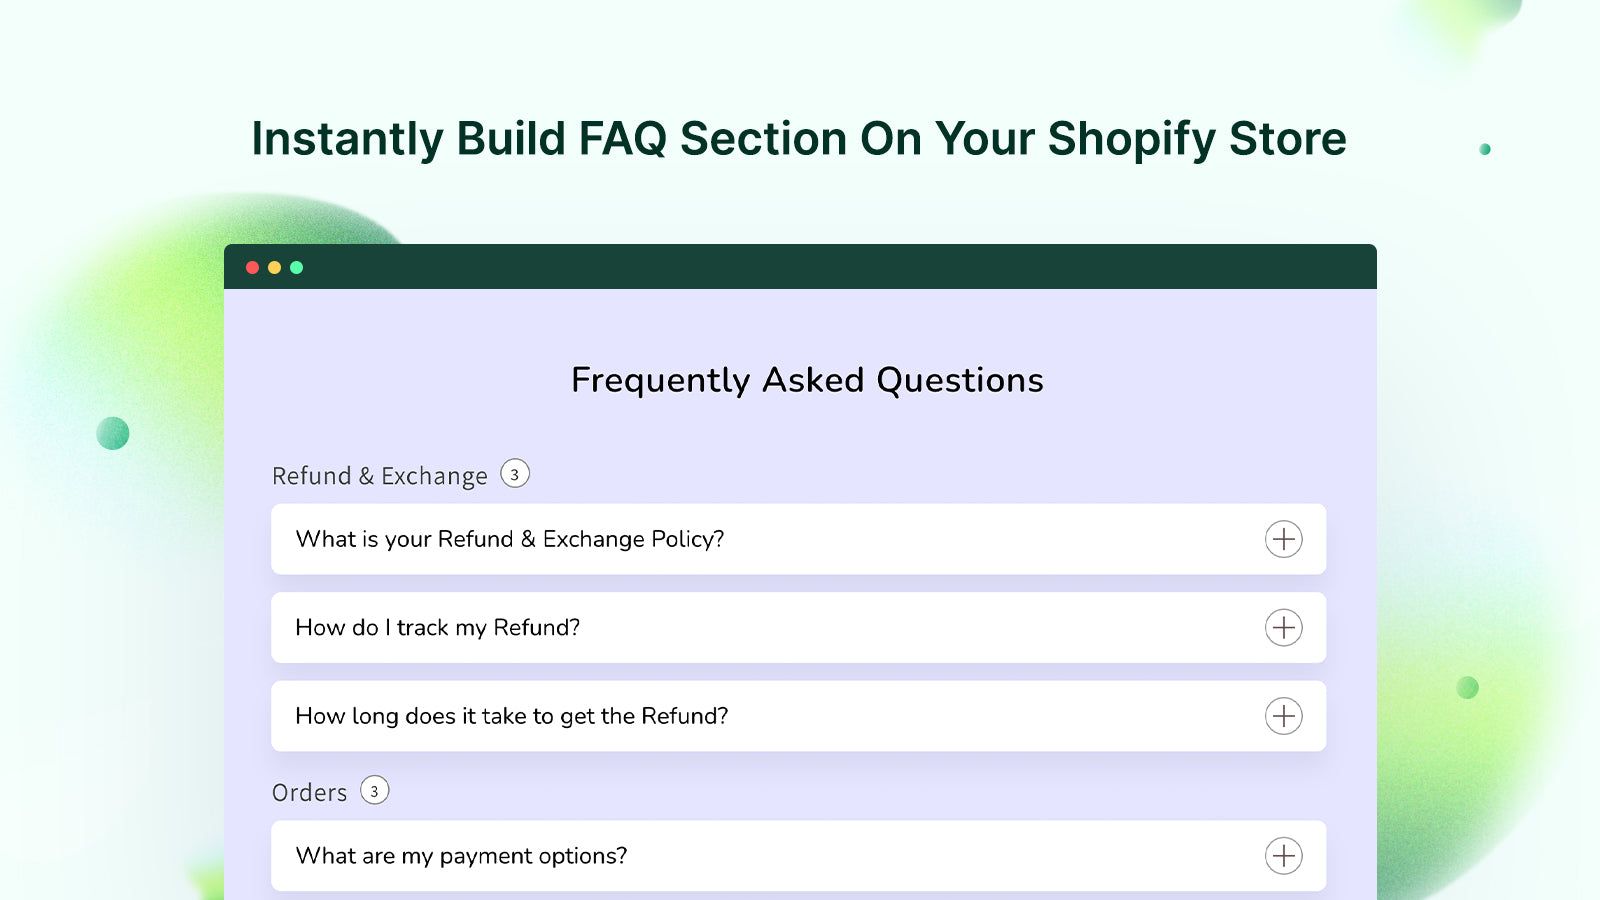 Instantly Build FAQ Section On Your Shopify Store